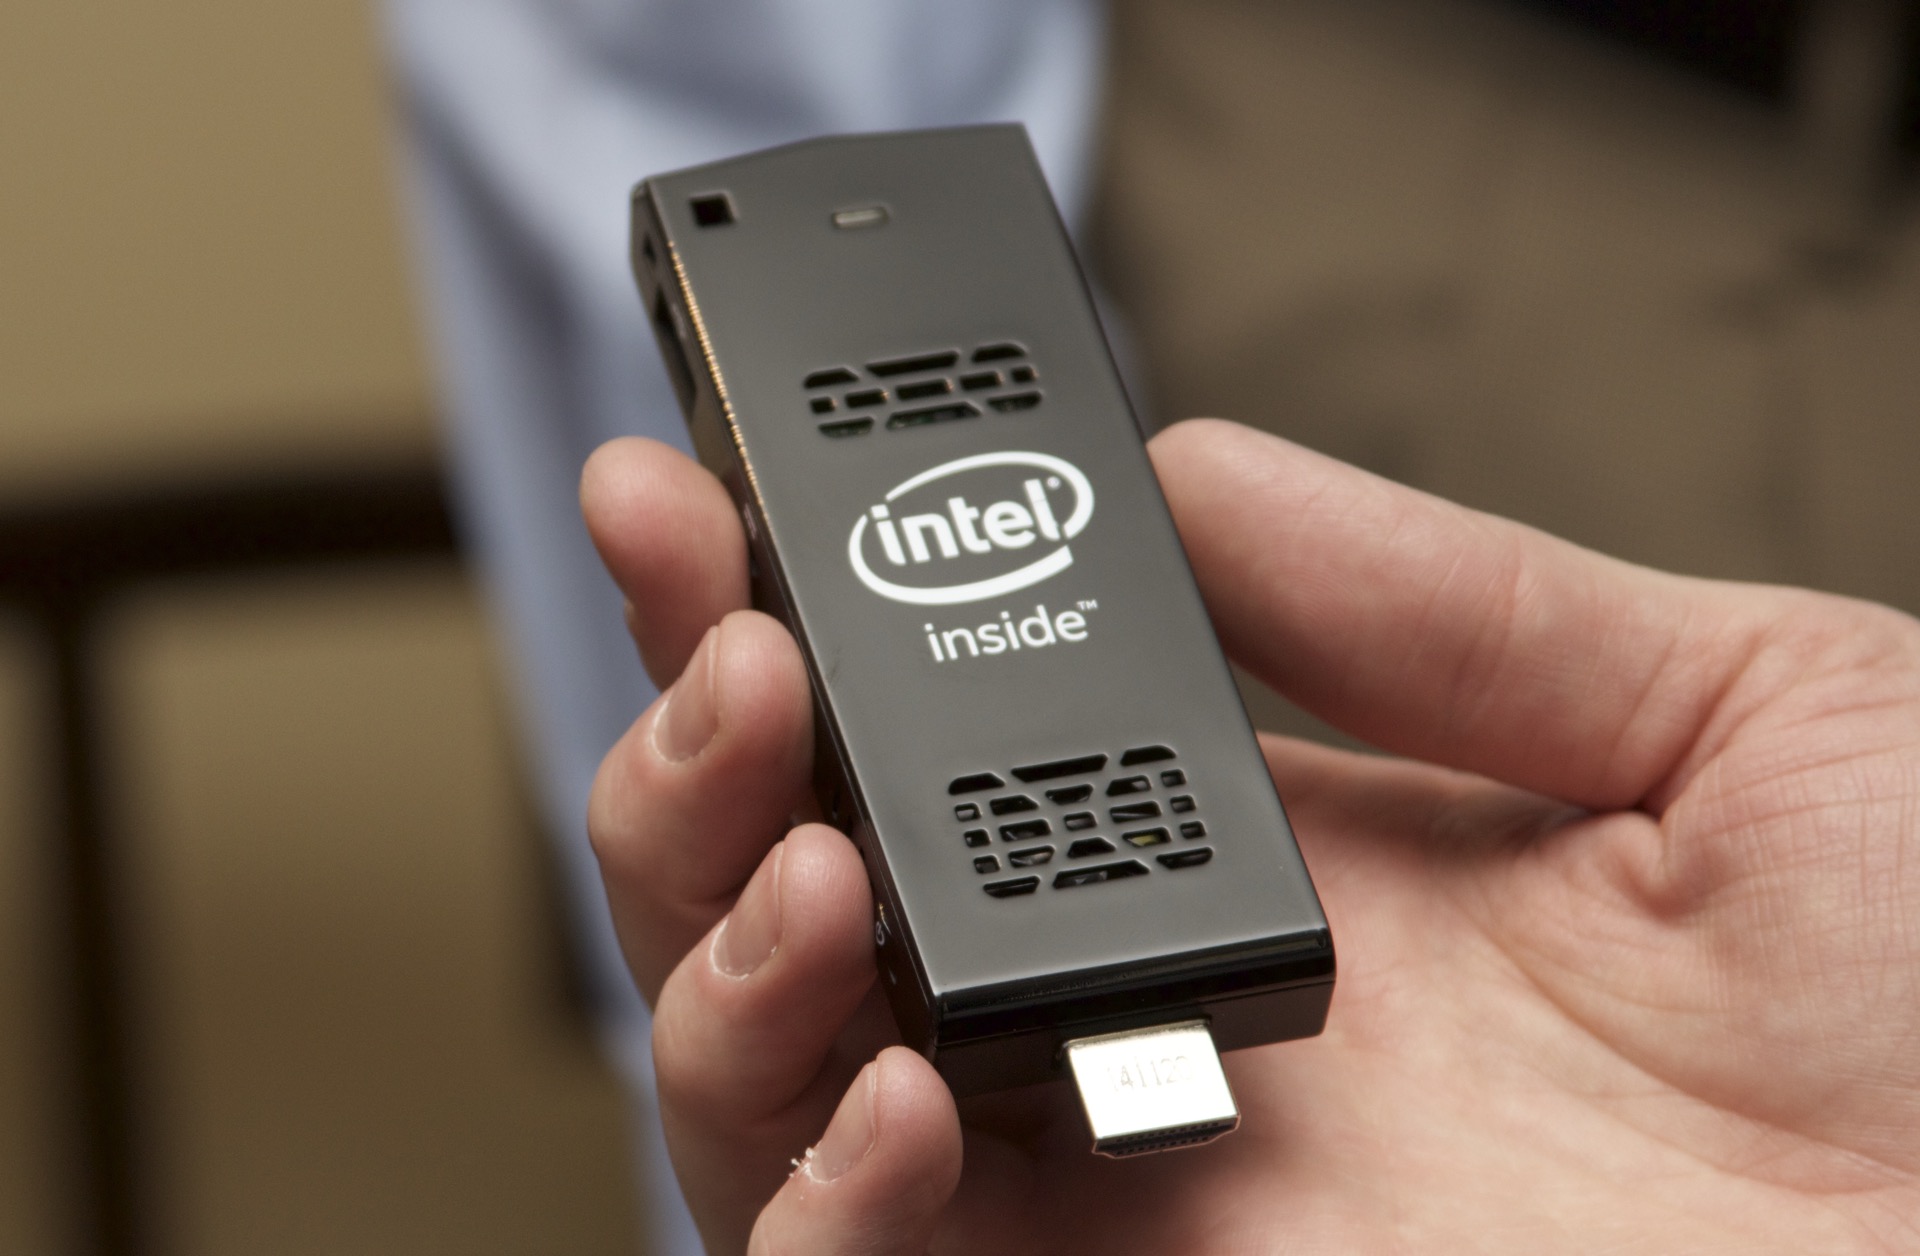 Intel's Compute Stick: A full PC that's tiny in size (and 